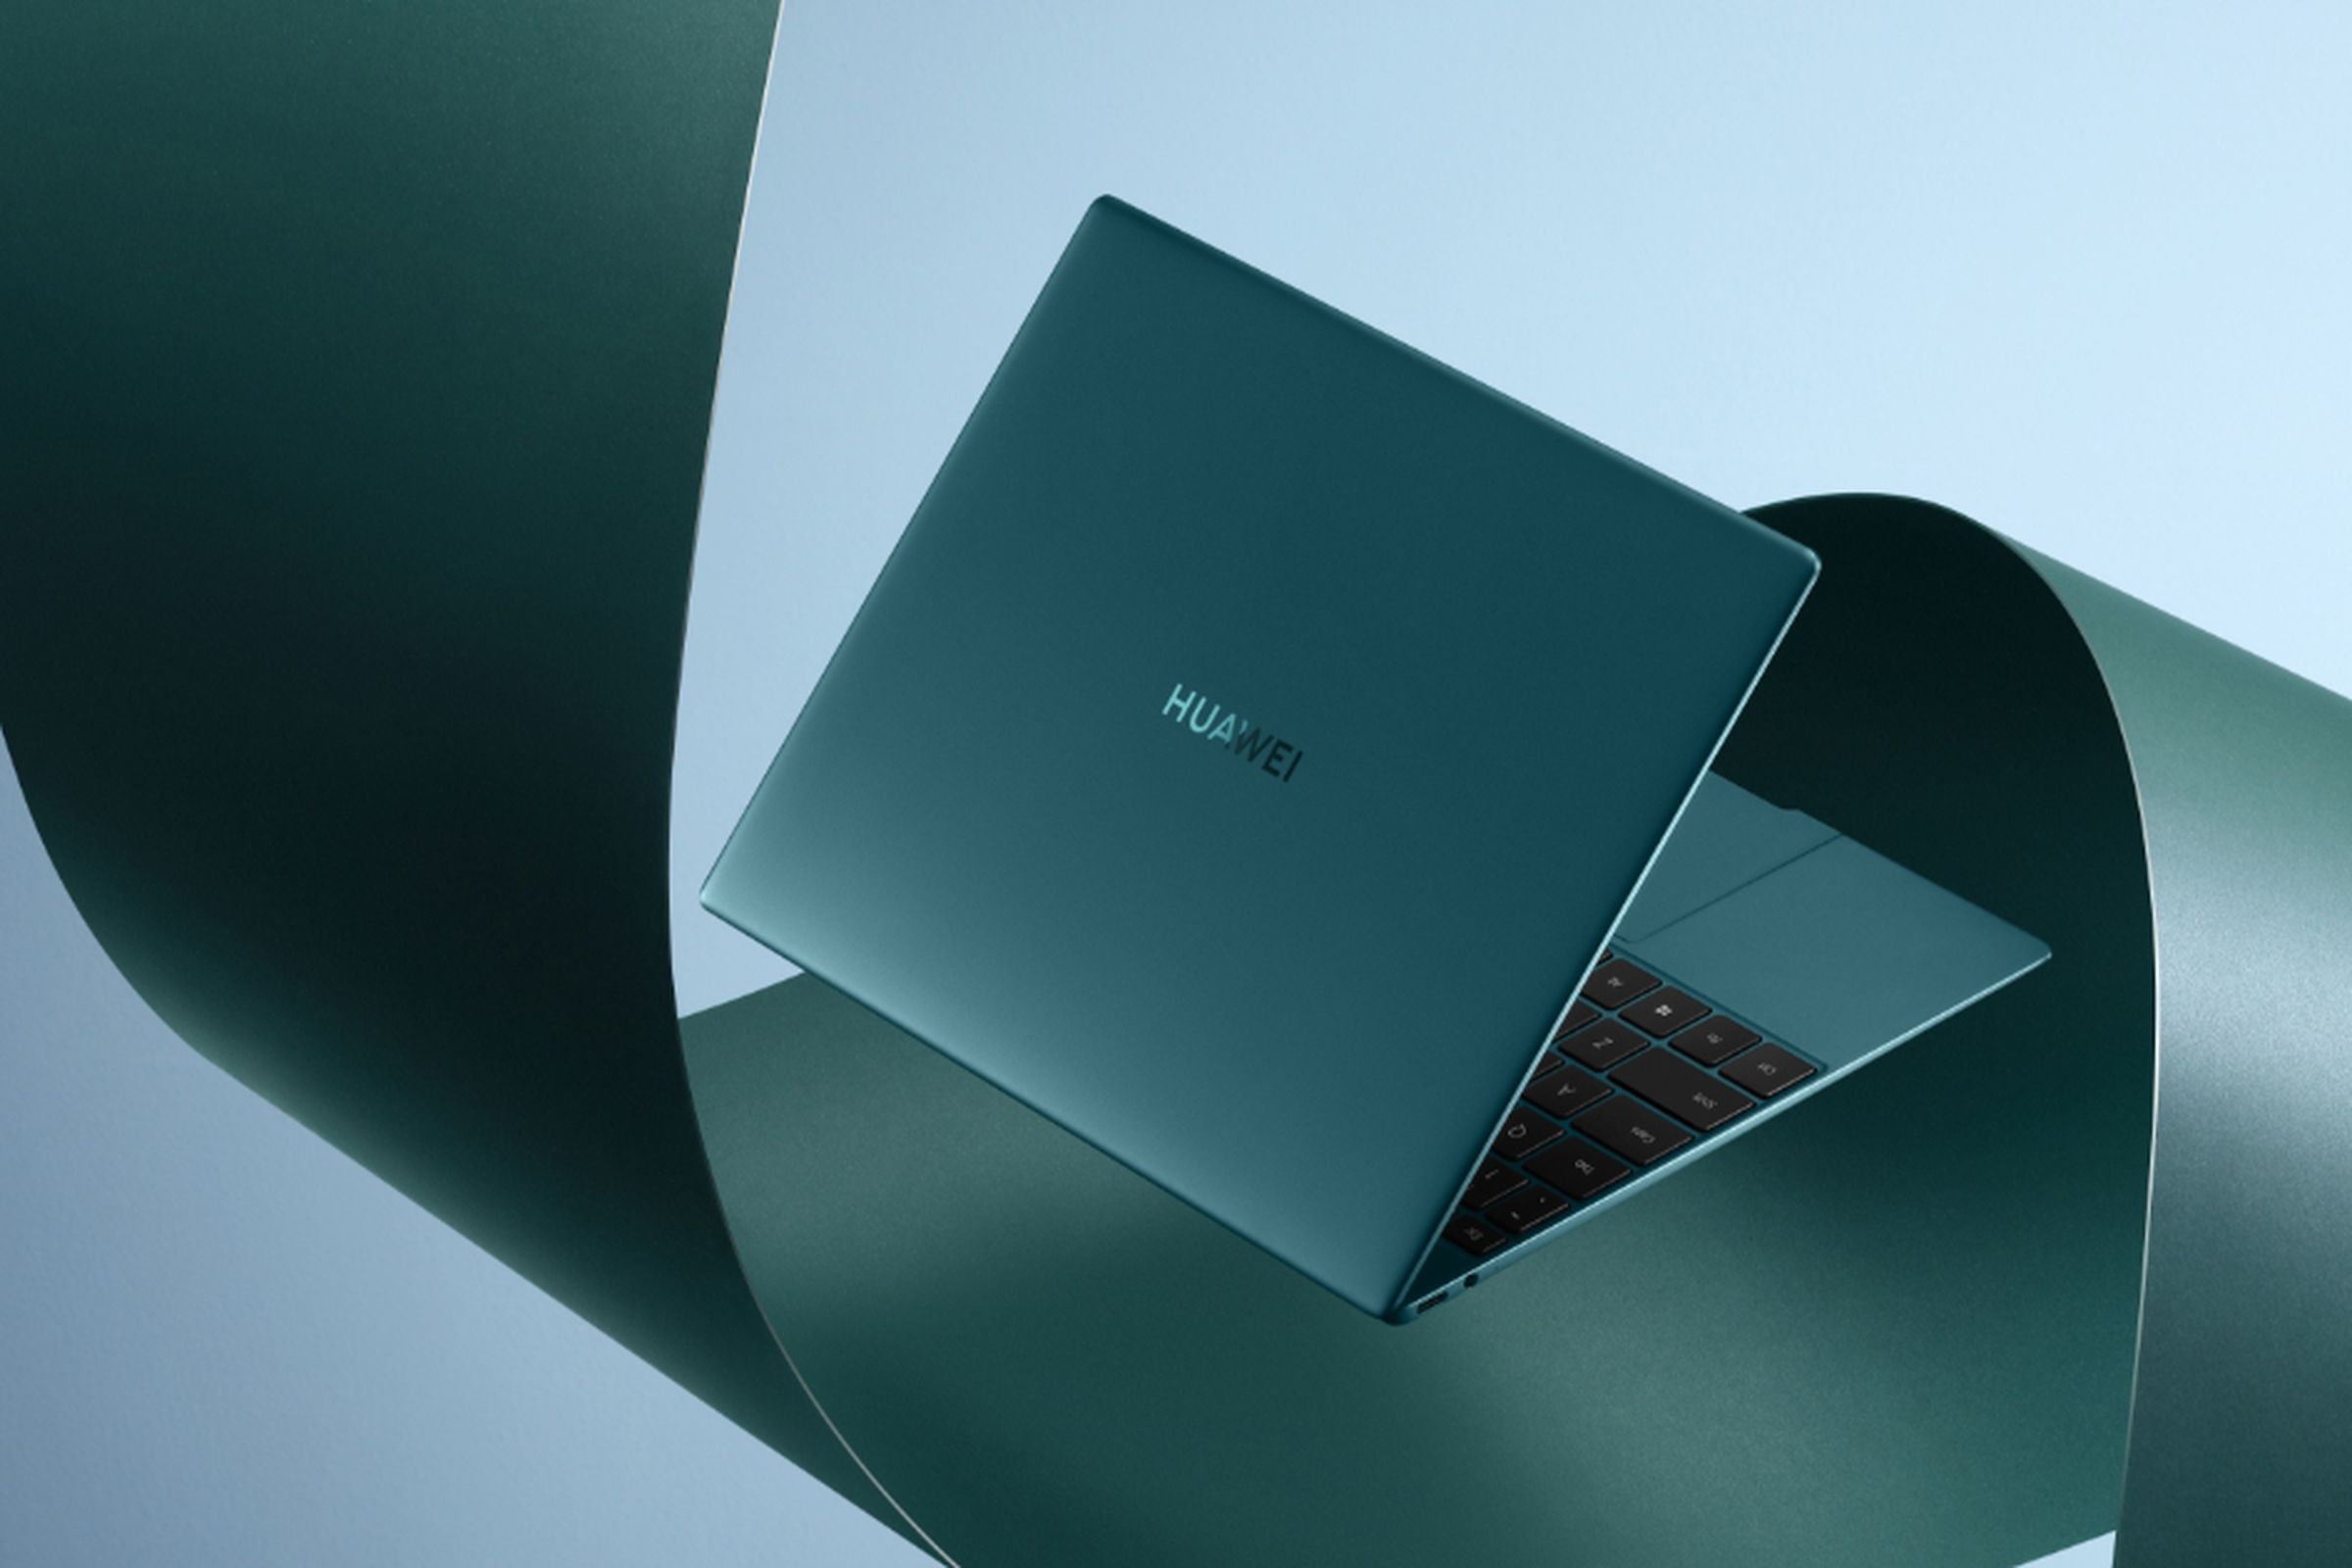 The MateBook X can be configured with up to an Intel 10th-Gen i7 CPU.